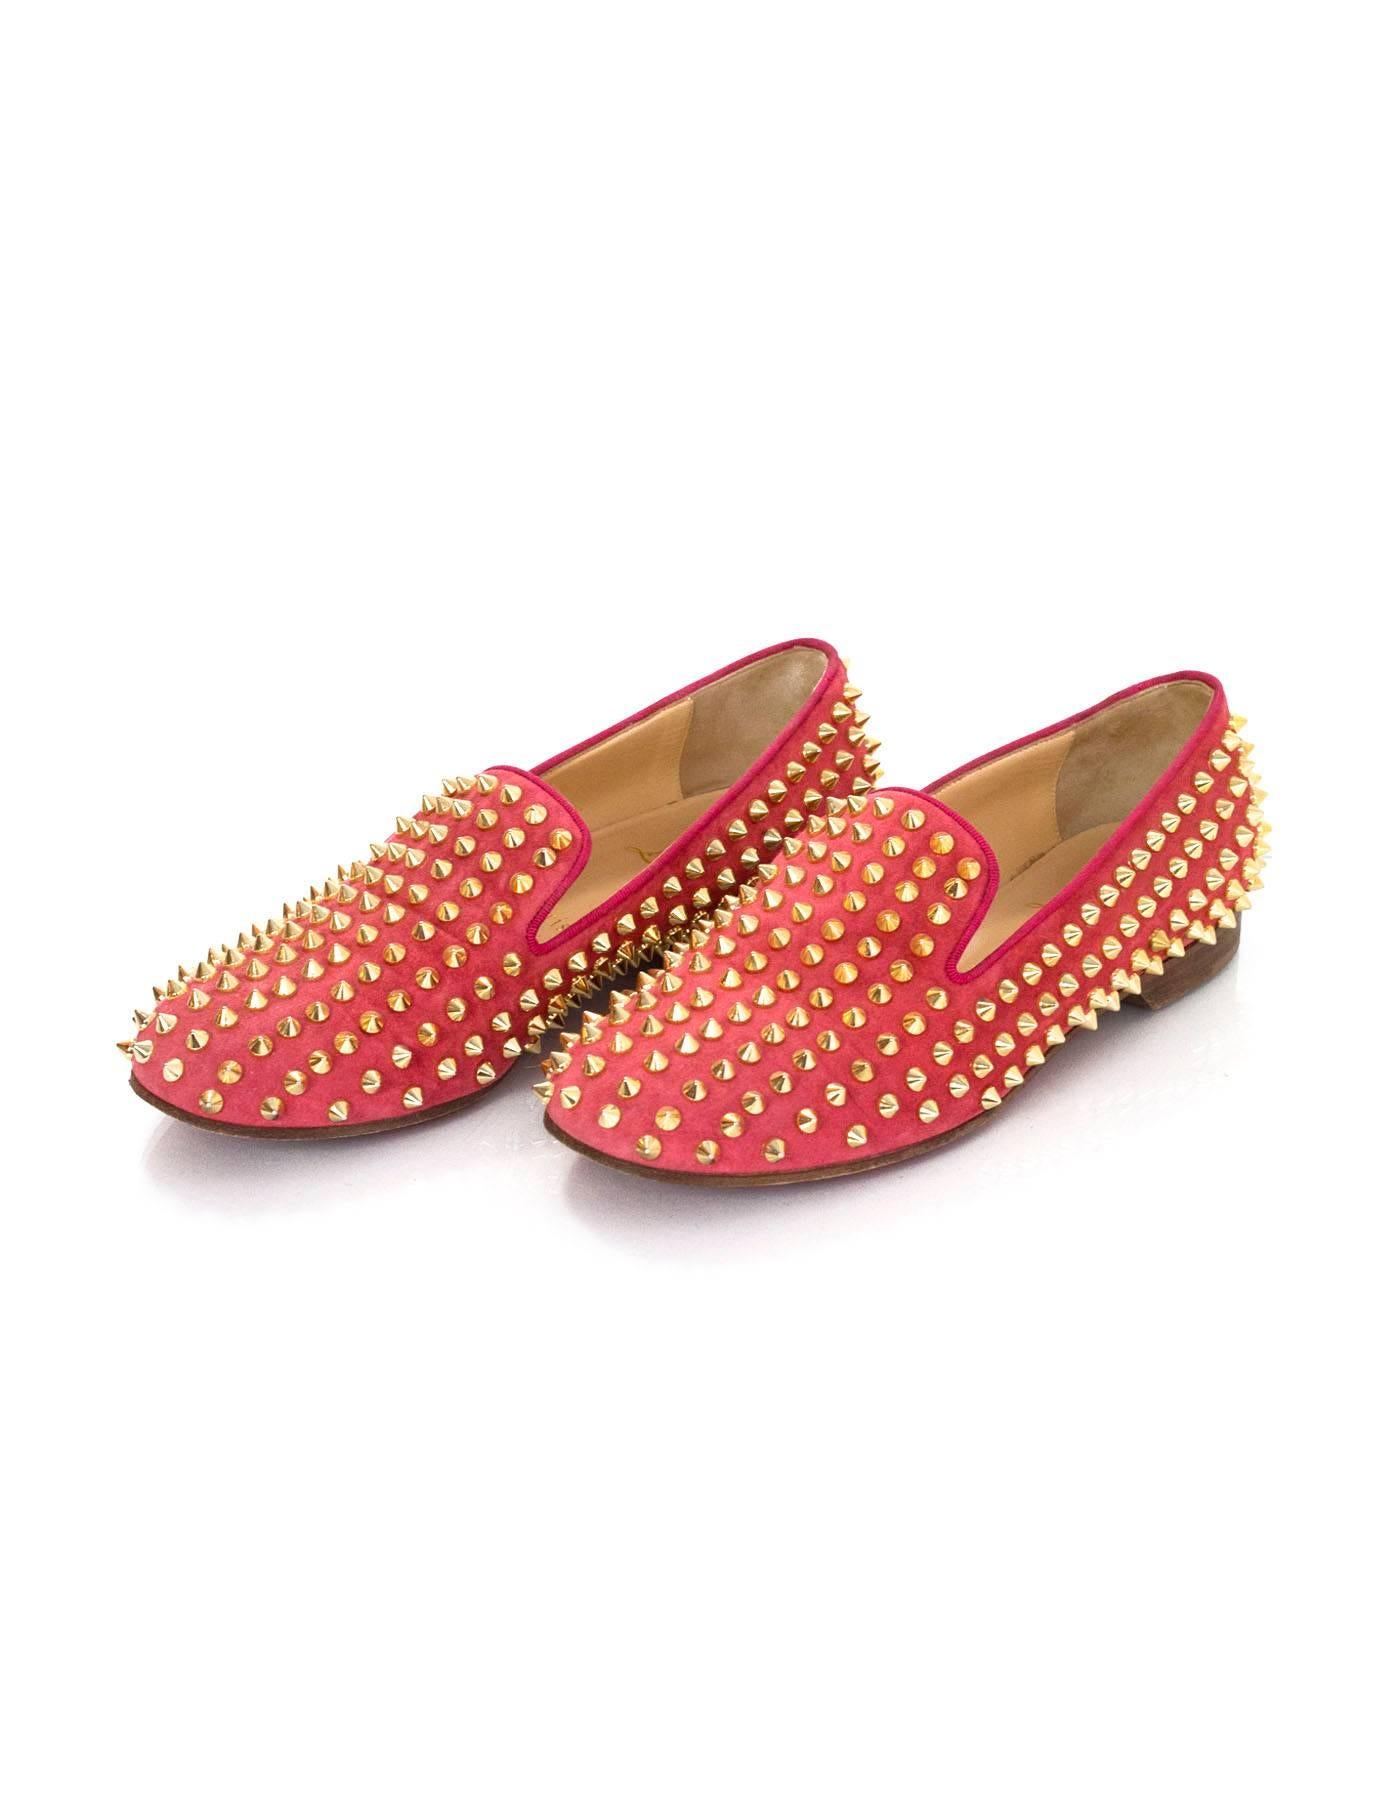 Orange Christian Louboutin Coral Suede and Goldtone Rolling Spike Loafers sz 37.5